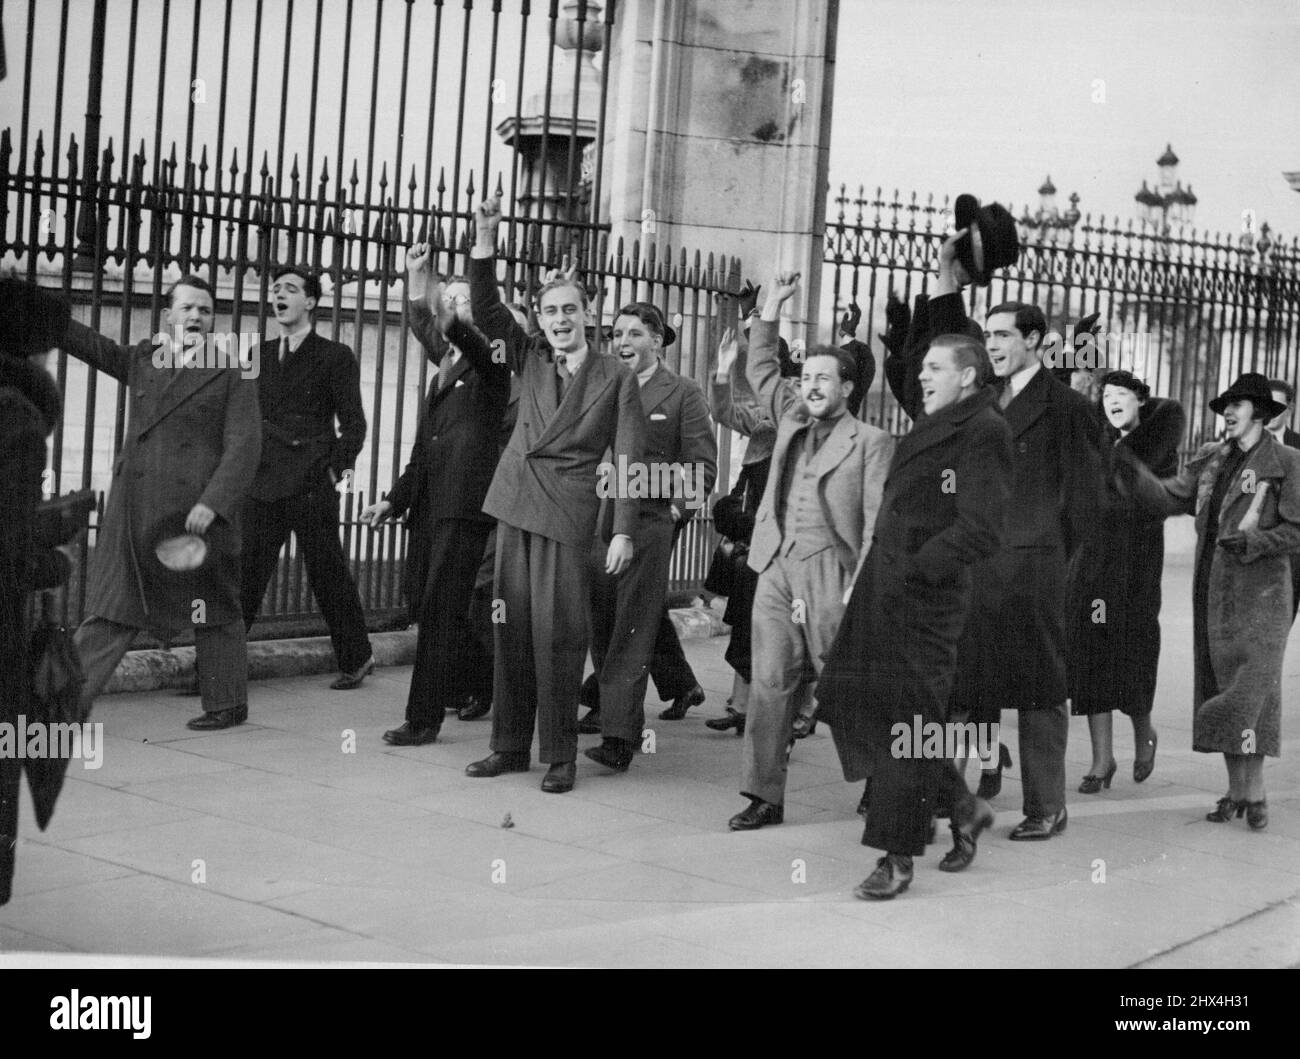 Young Men Give Three Cheers For The King At Buckingham Palace Young Men Giving three Cheers for the King Out Side Buckingham Place. London, Eg, December 4 --- Since It was Announced Yesterday that king with Mrs. Reported to be in Favour of Marriage with Mrs. Ernest Simpson, an American crowd has been continuously at the gates of Buckingham palace waiting for a glimpse of his majesty. At midday today party of his majesty. At midday today party of young men and girl gave three cheers for the King. January 25, 1937. (Photo by Associated Press Photo). Stock Photo